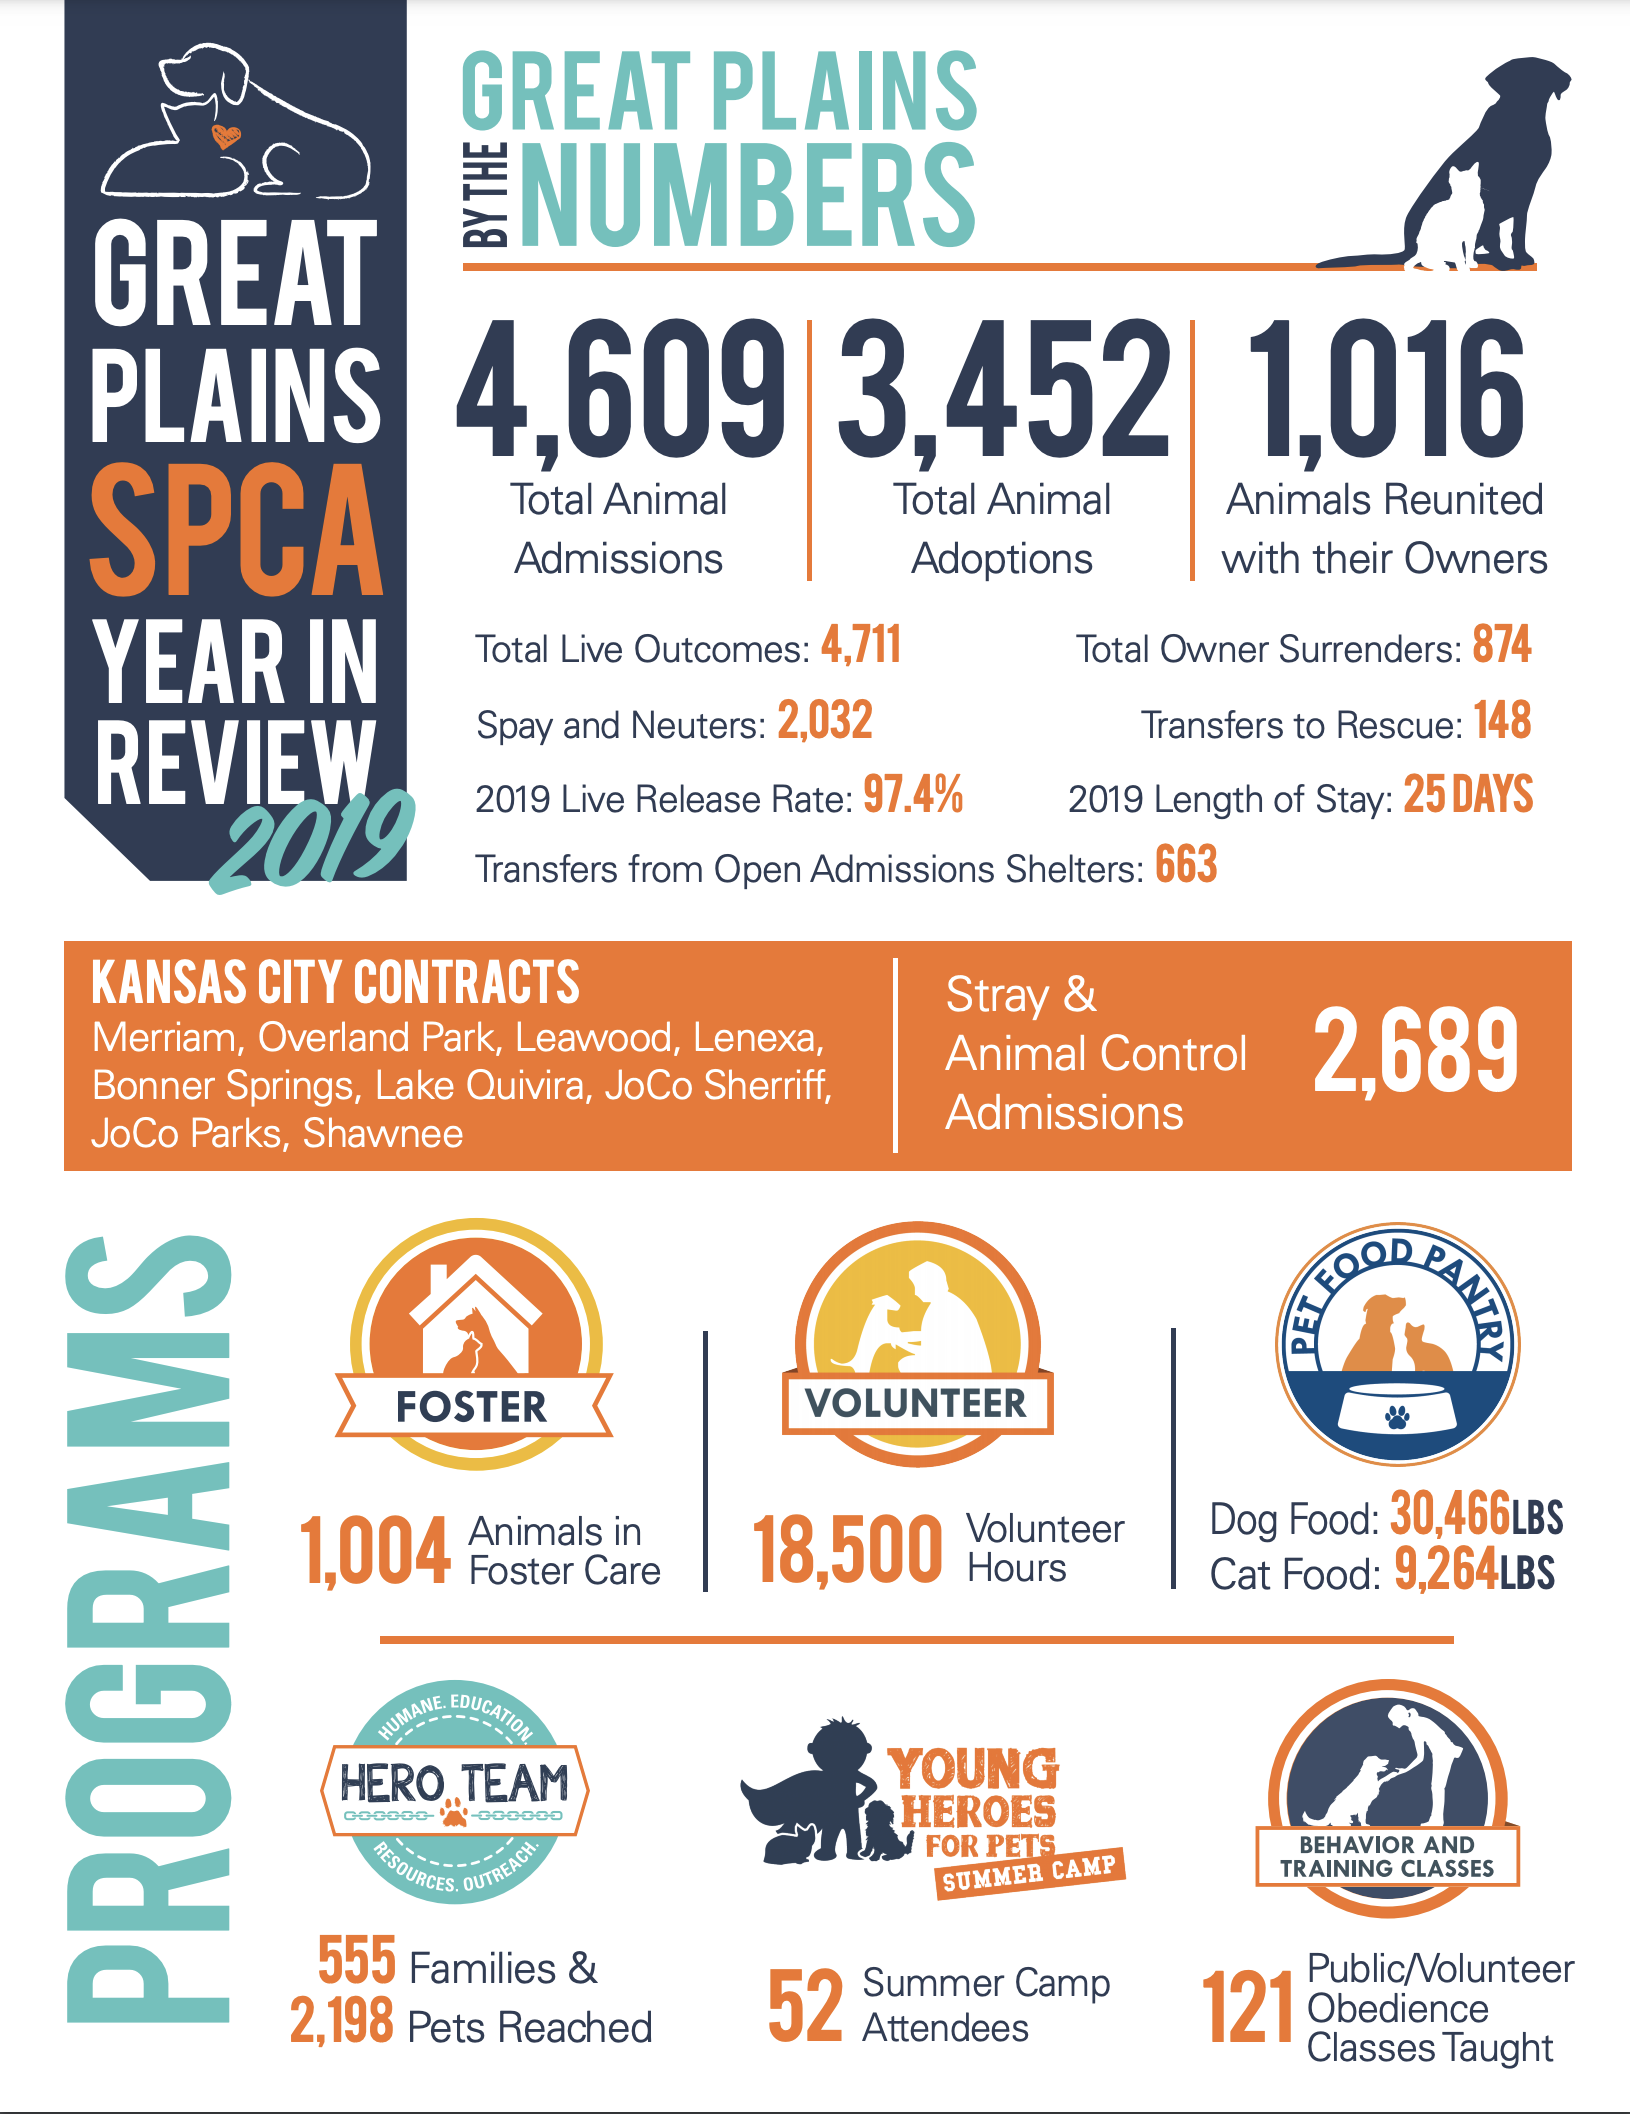 Great Plains SPCA 2019 Year In Review